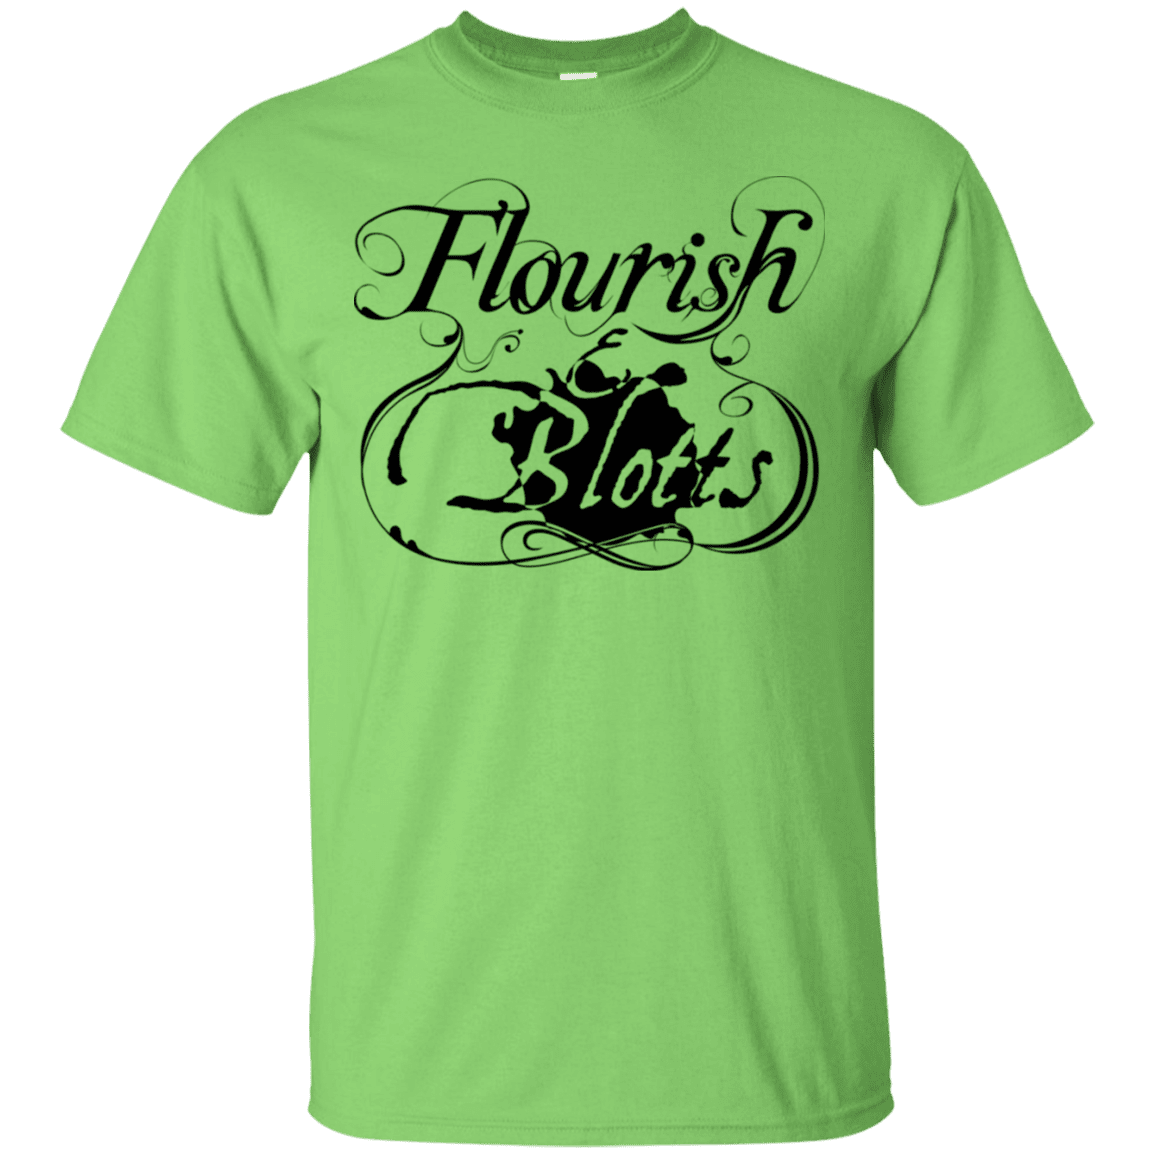 T-Shirts Lime / S Flourish and Blotts of Diagon Alley T-Shirt